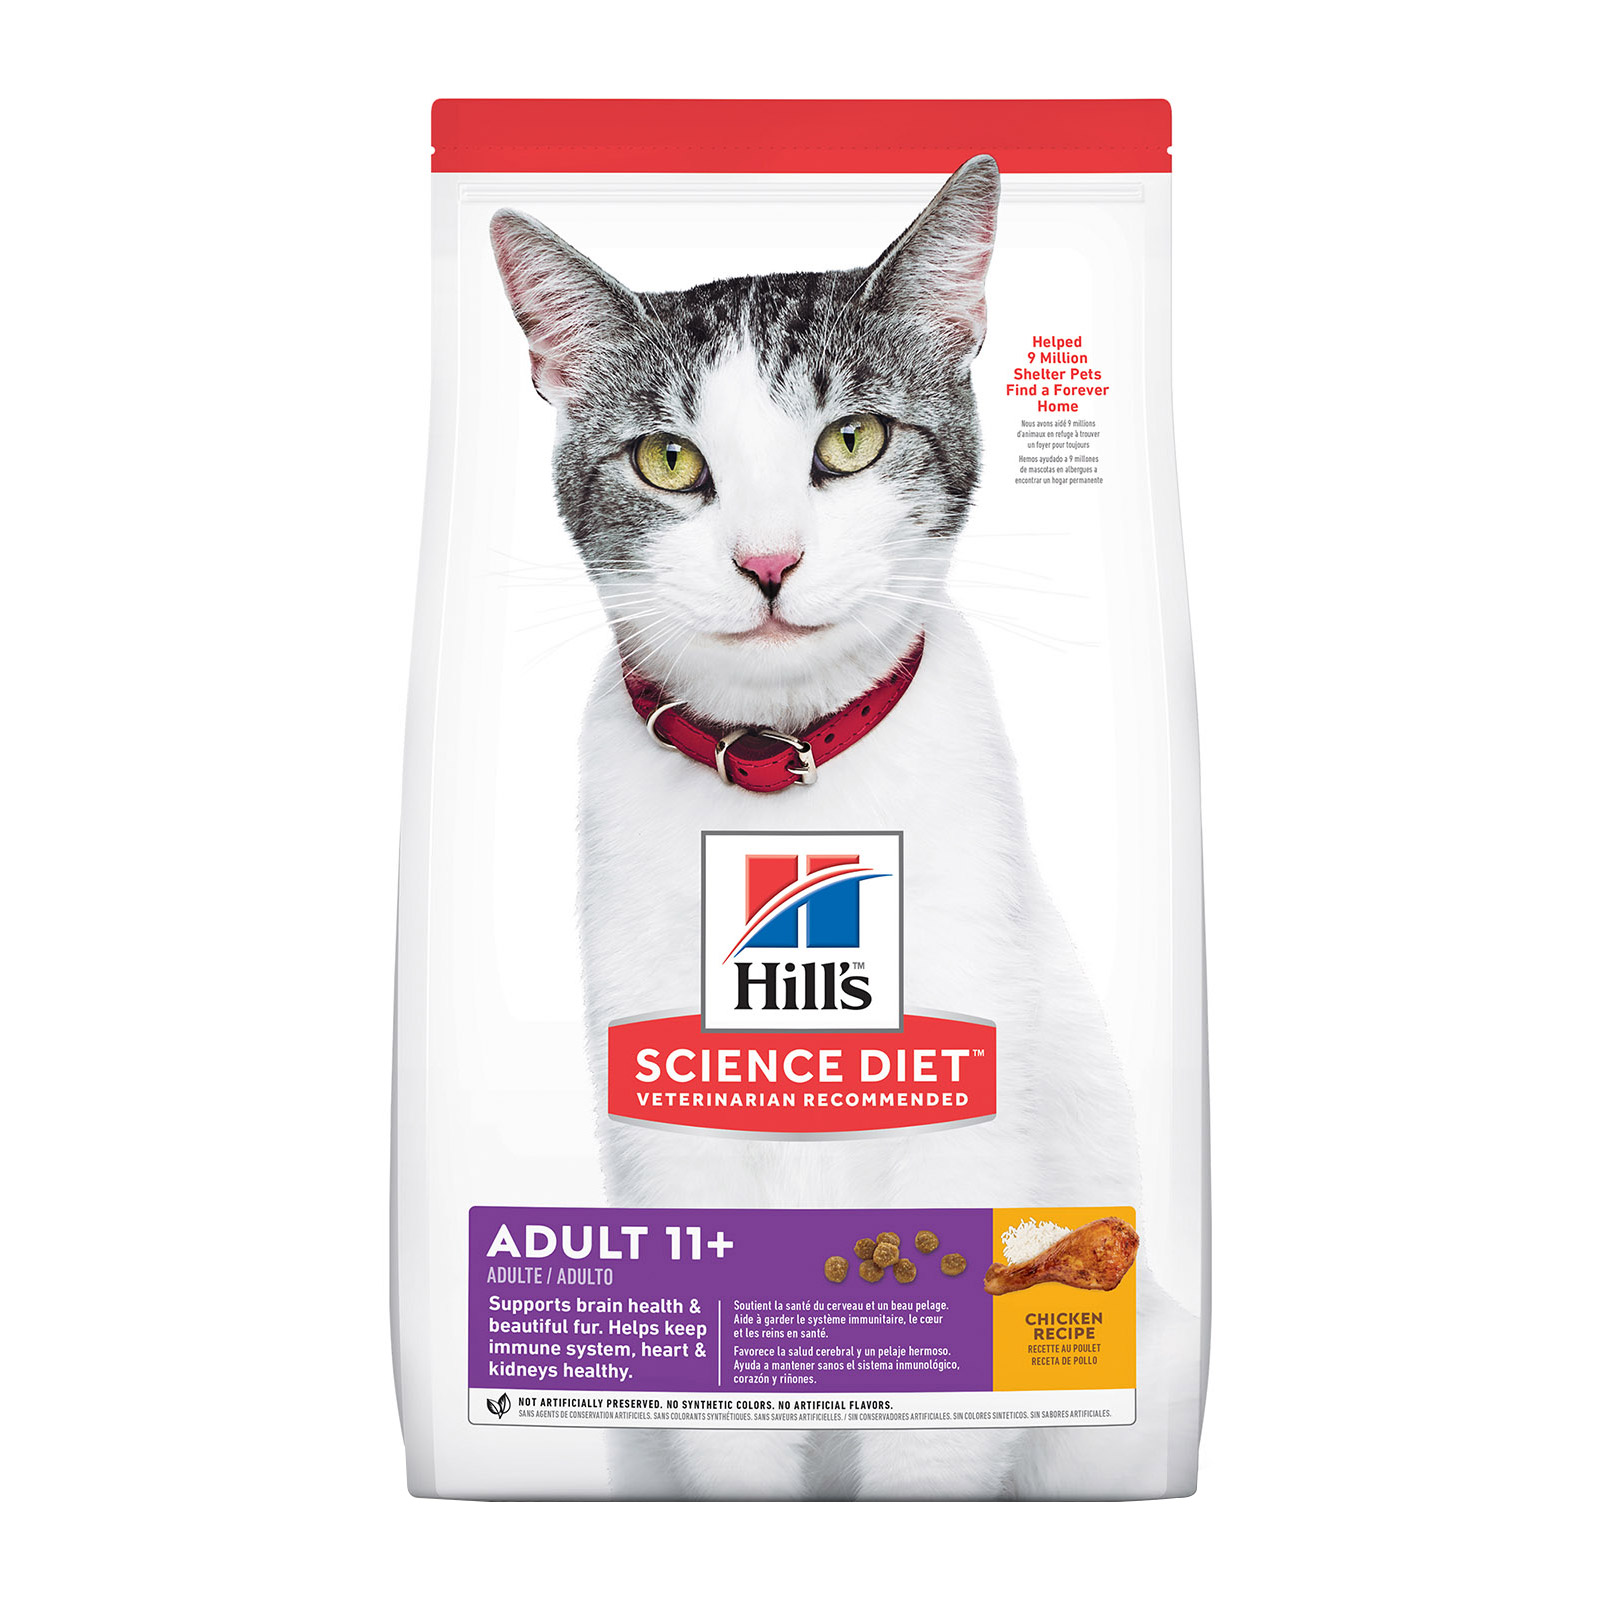 Hill's Science Diet Adult 11+ Chicken Senior Dry Cat Food for Food